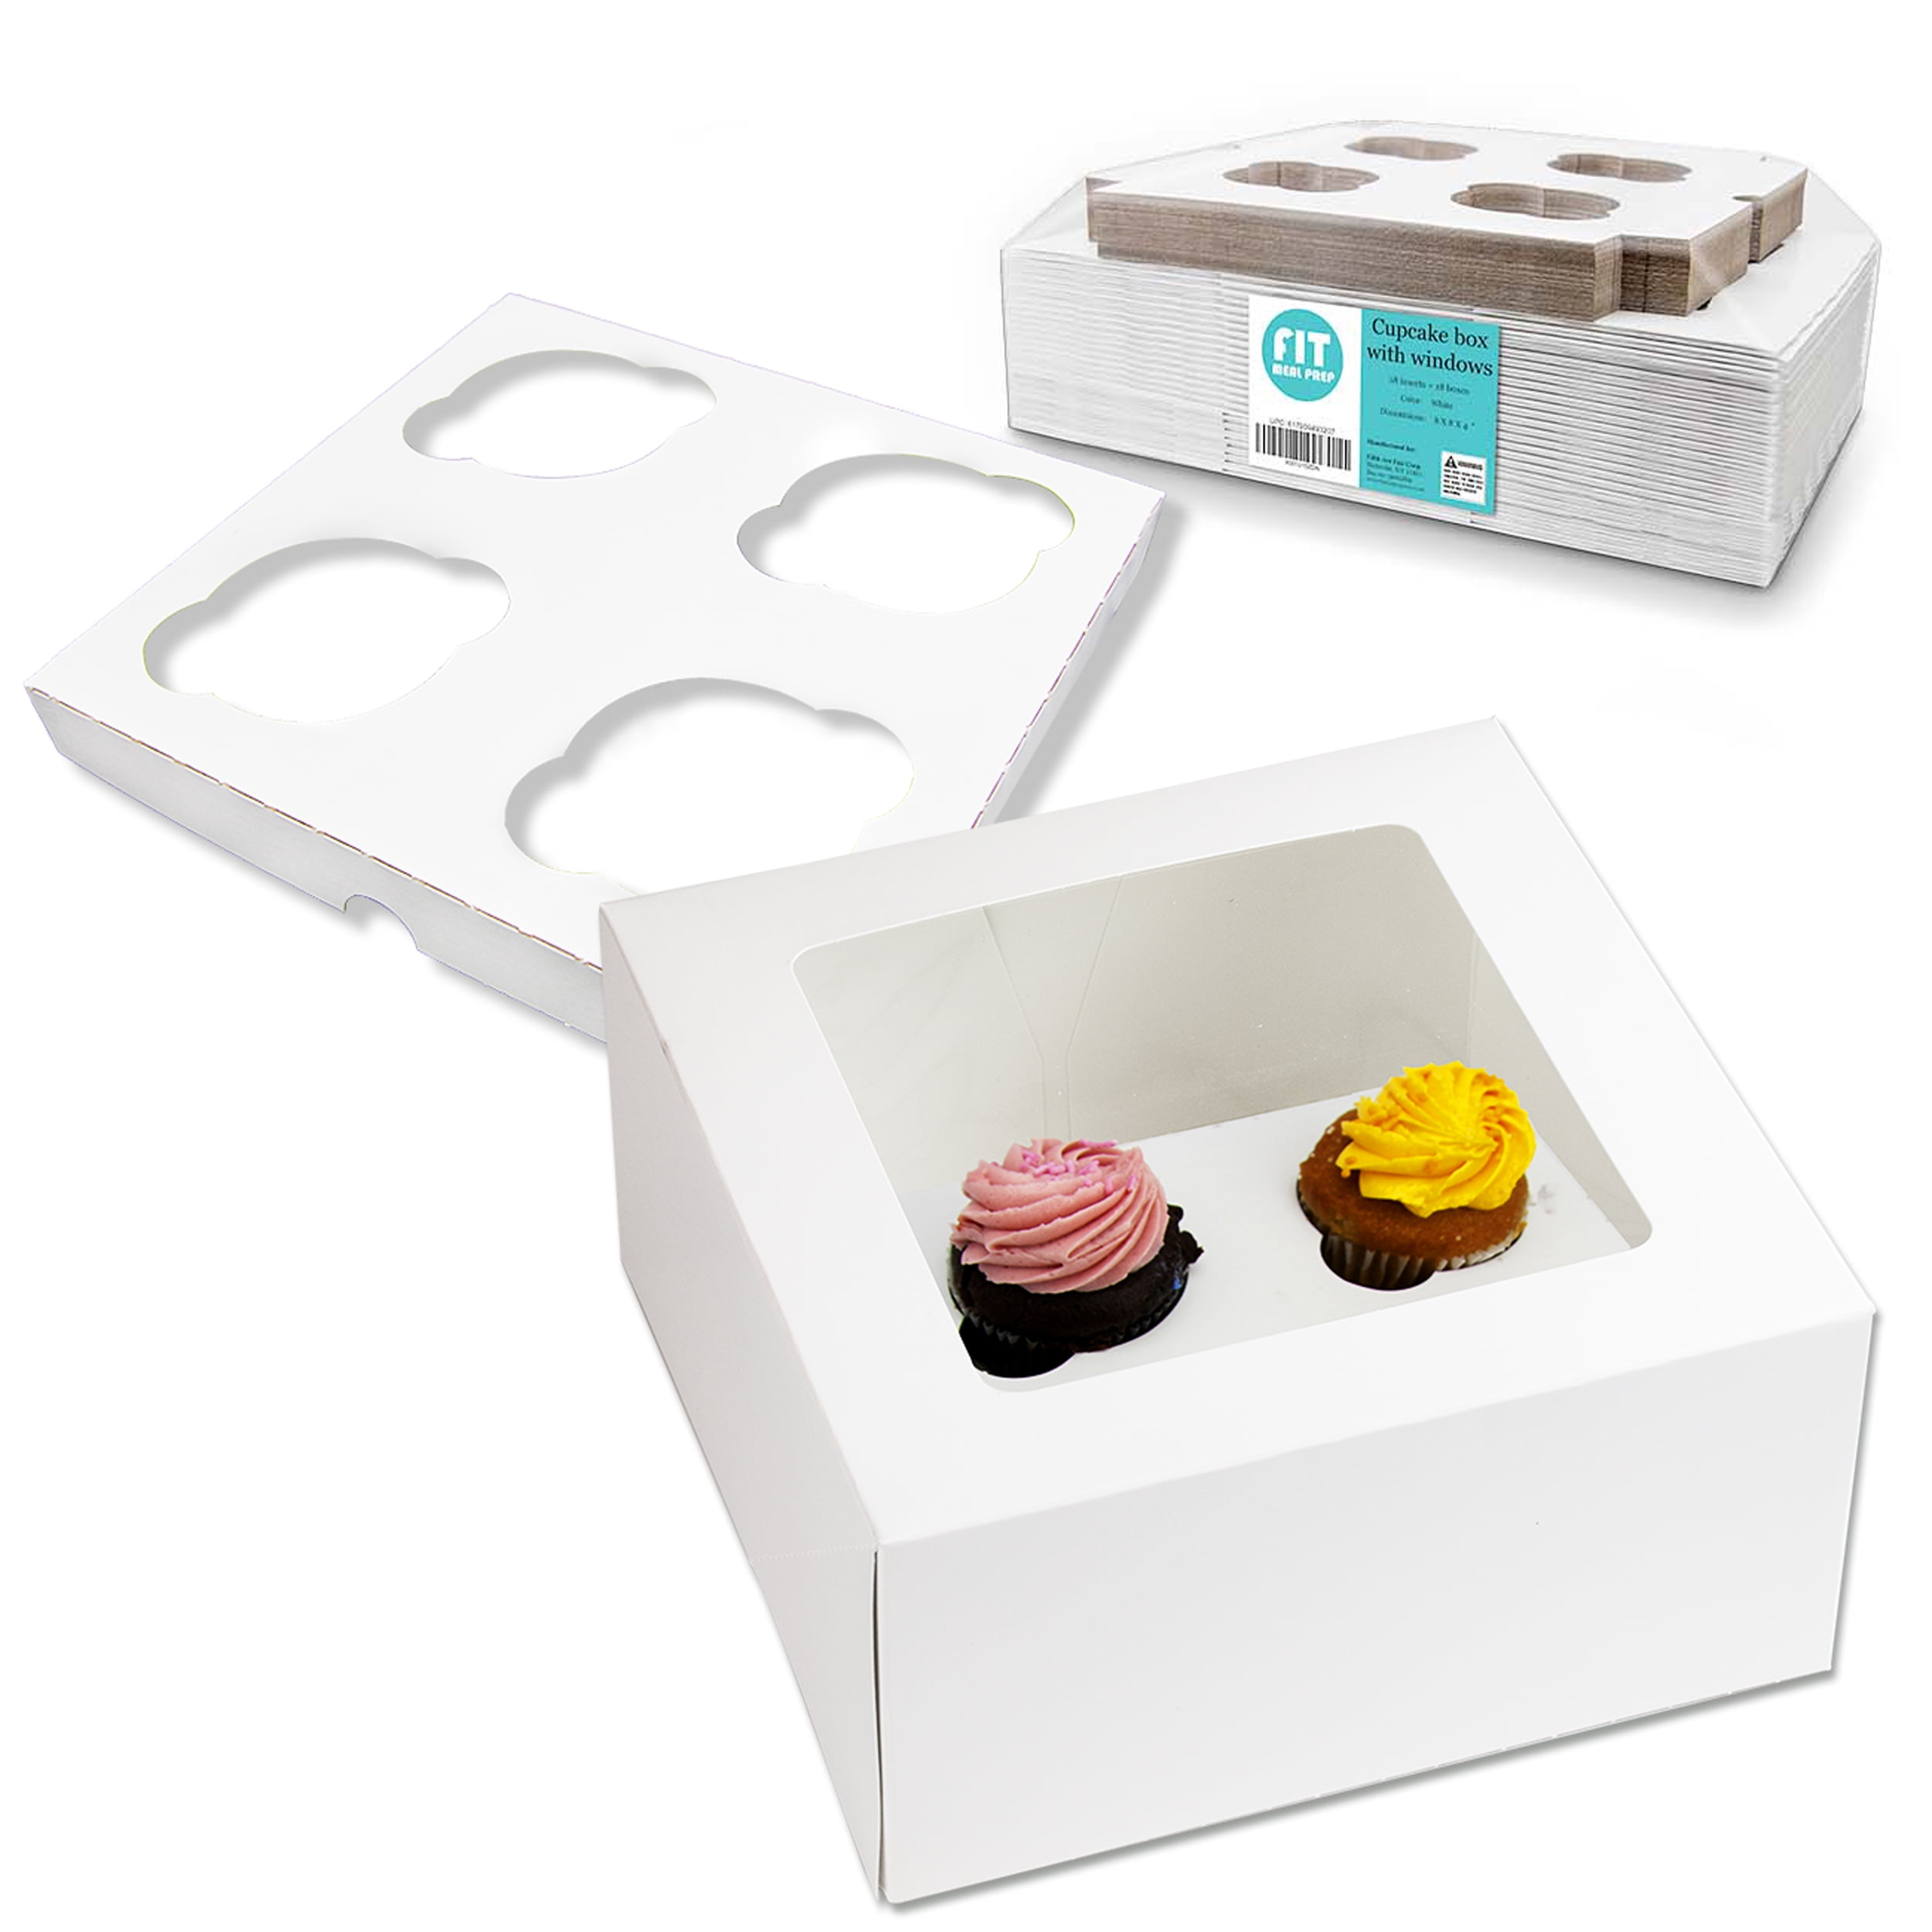 10 Cupcake Box holds 4 each WHITE 8x8x4 Bakery/Cake Box and Inserts for 40 